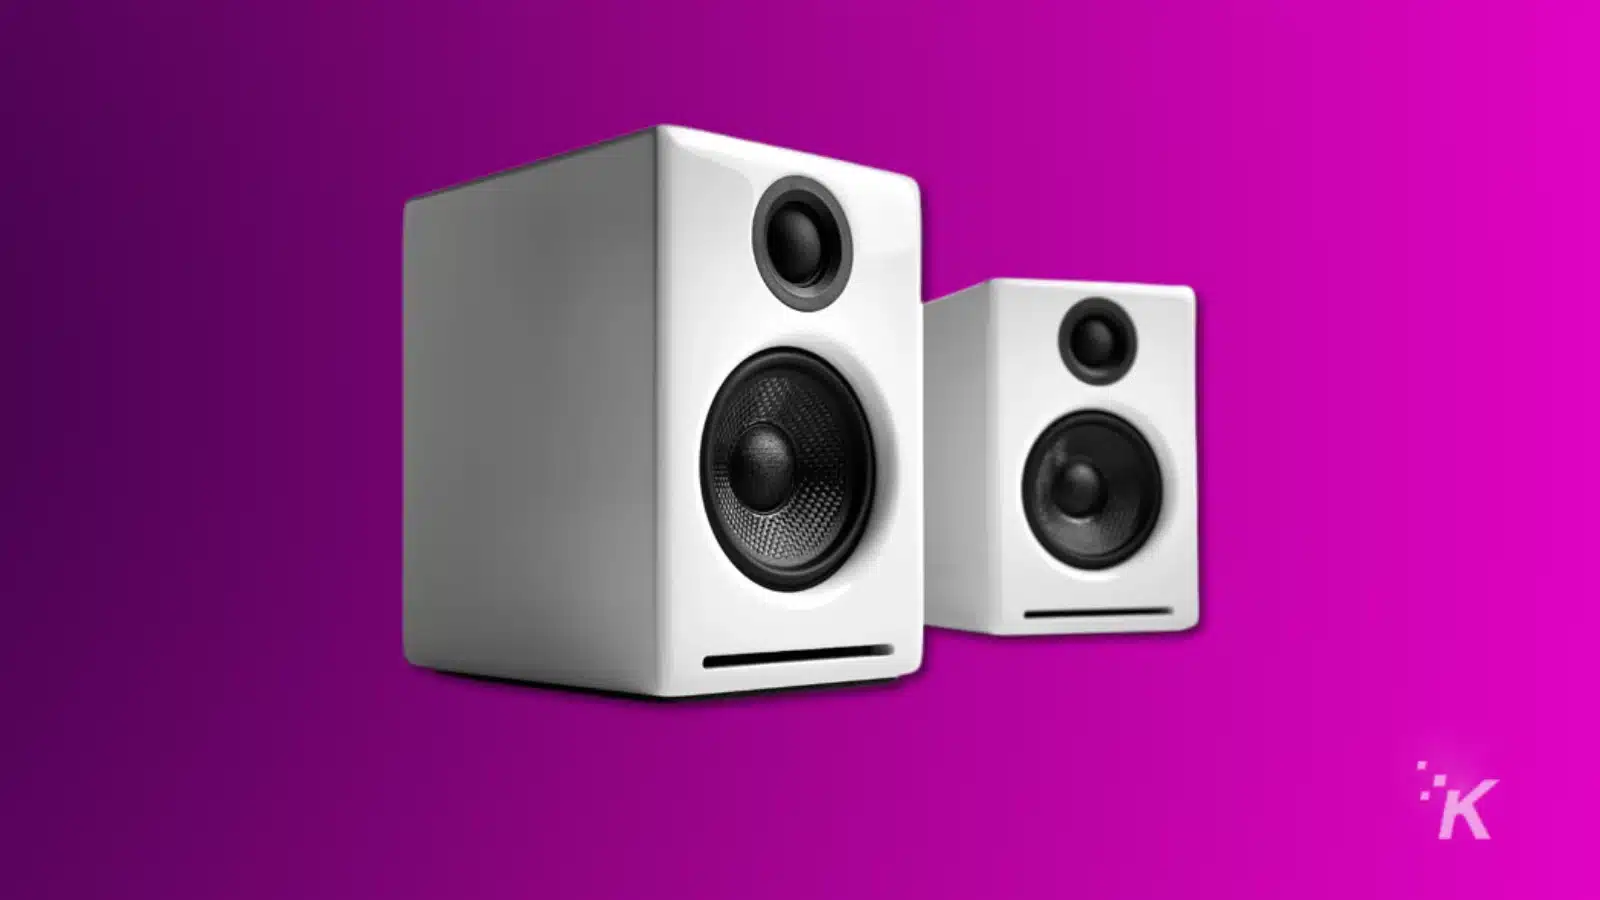 Render of audioengine a2+ white speakers on a purple background